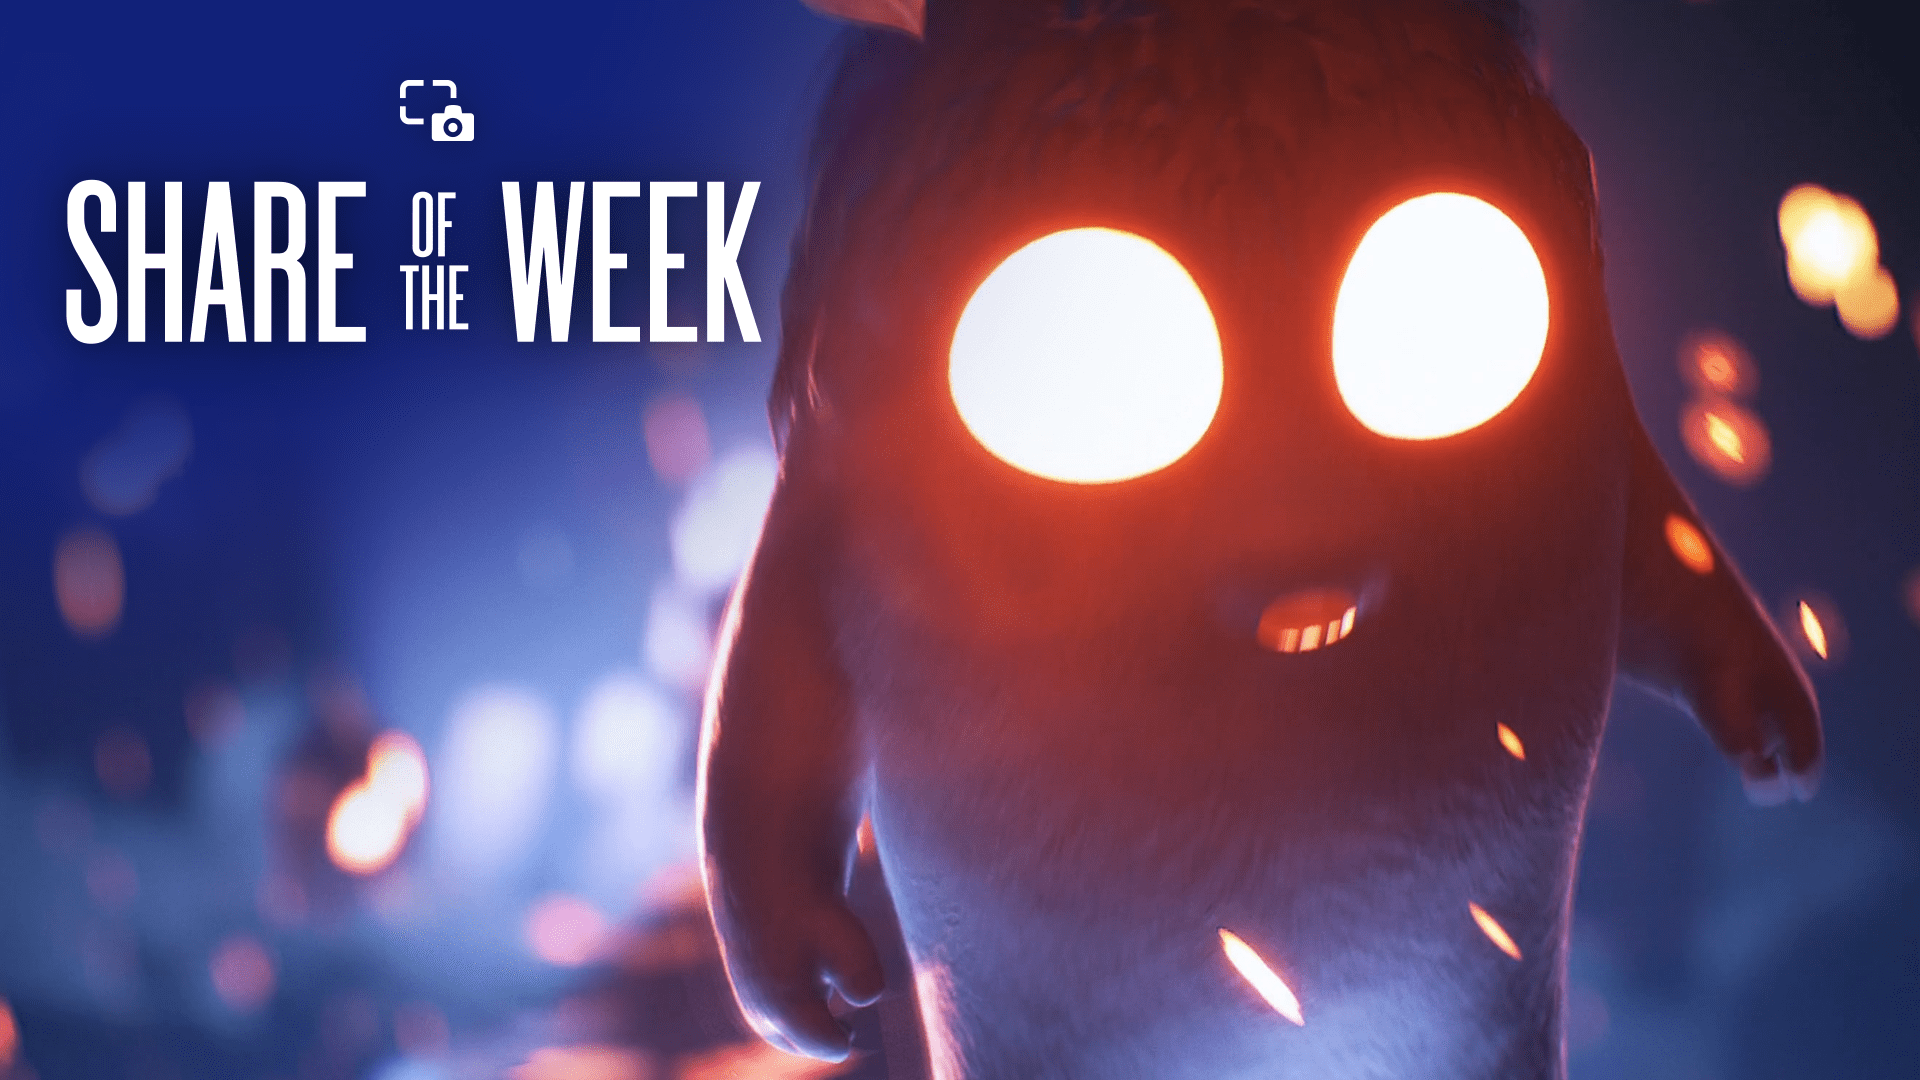 Share Of The Week: Scary thumbnail